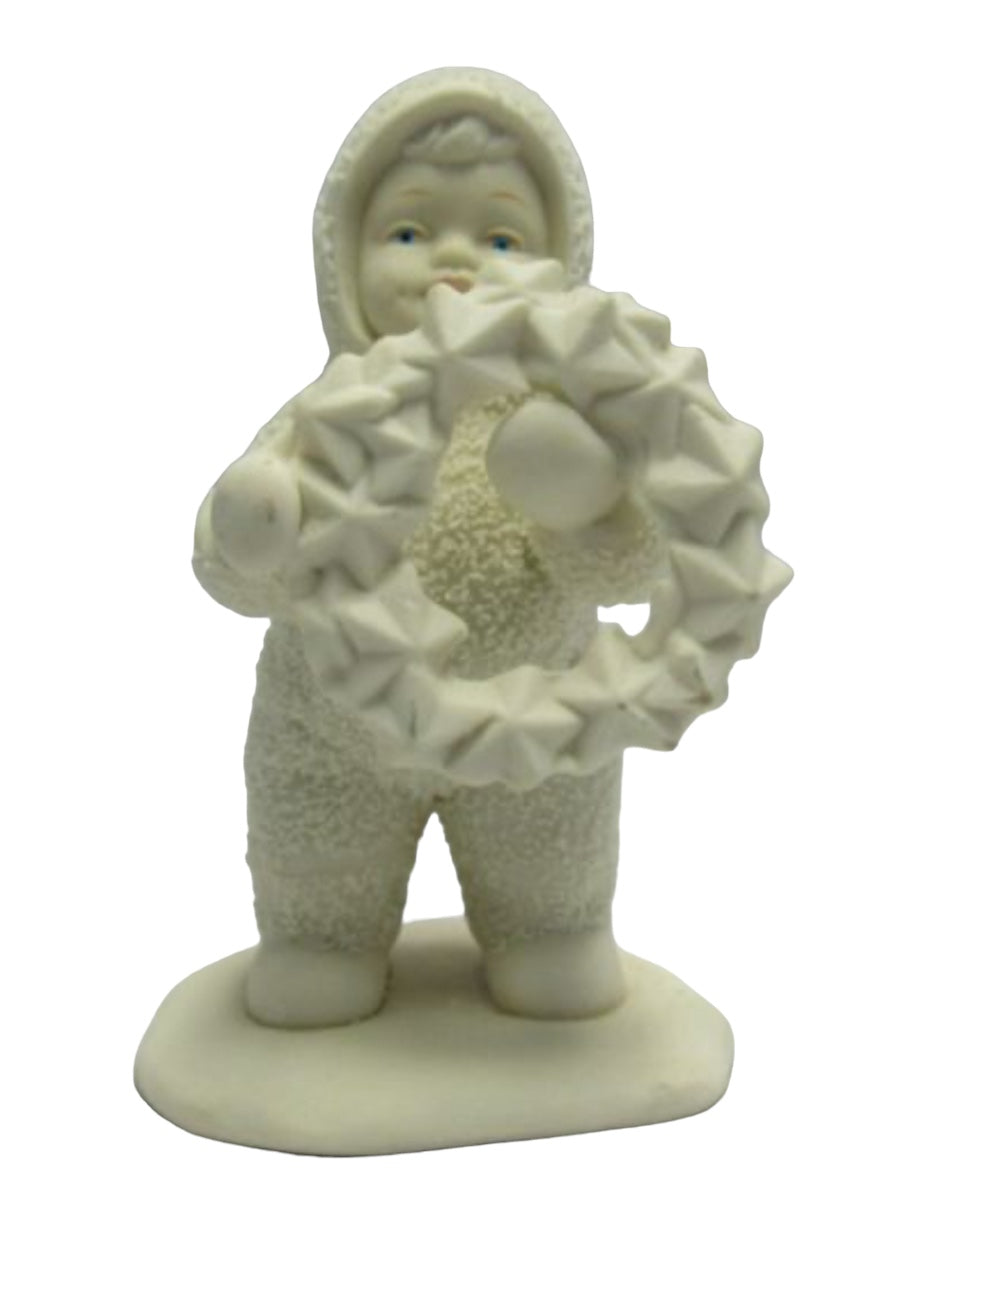 Snowbabies - I Made This Just For You! Figurine